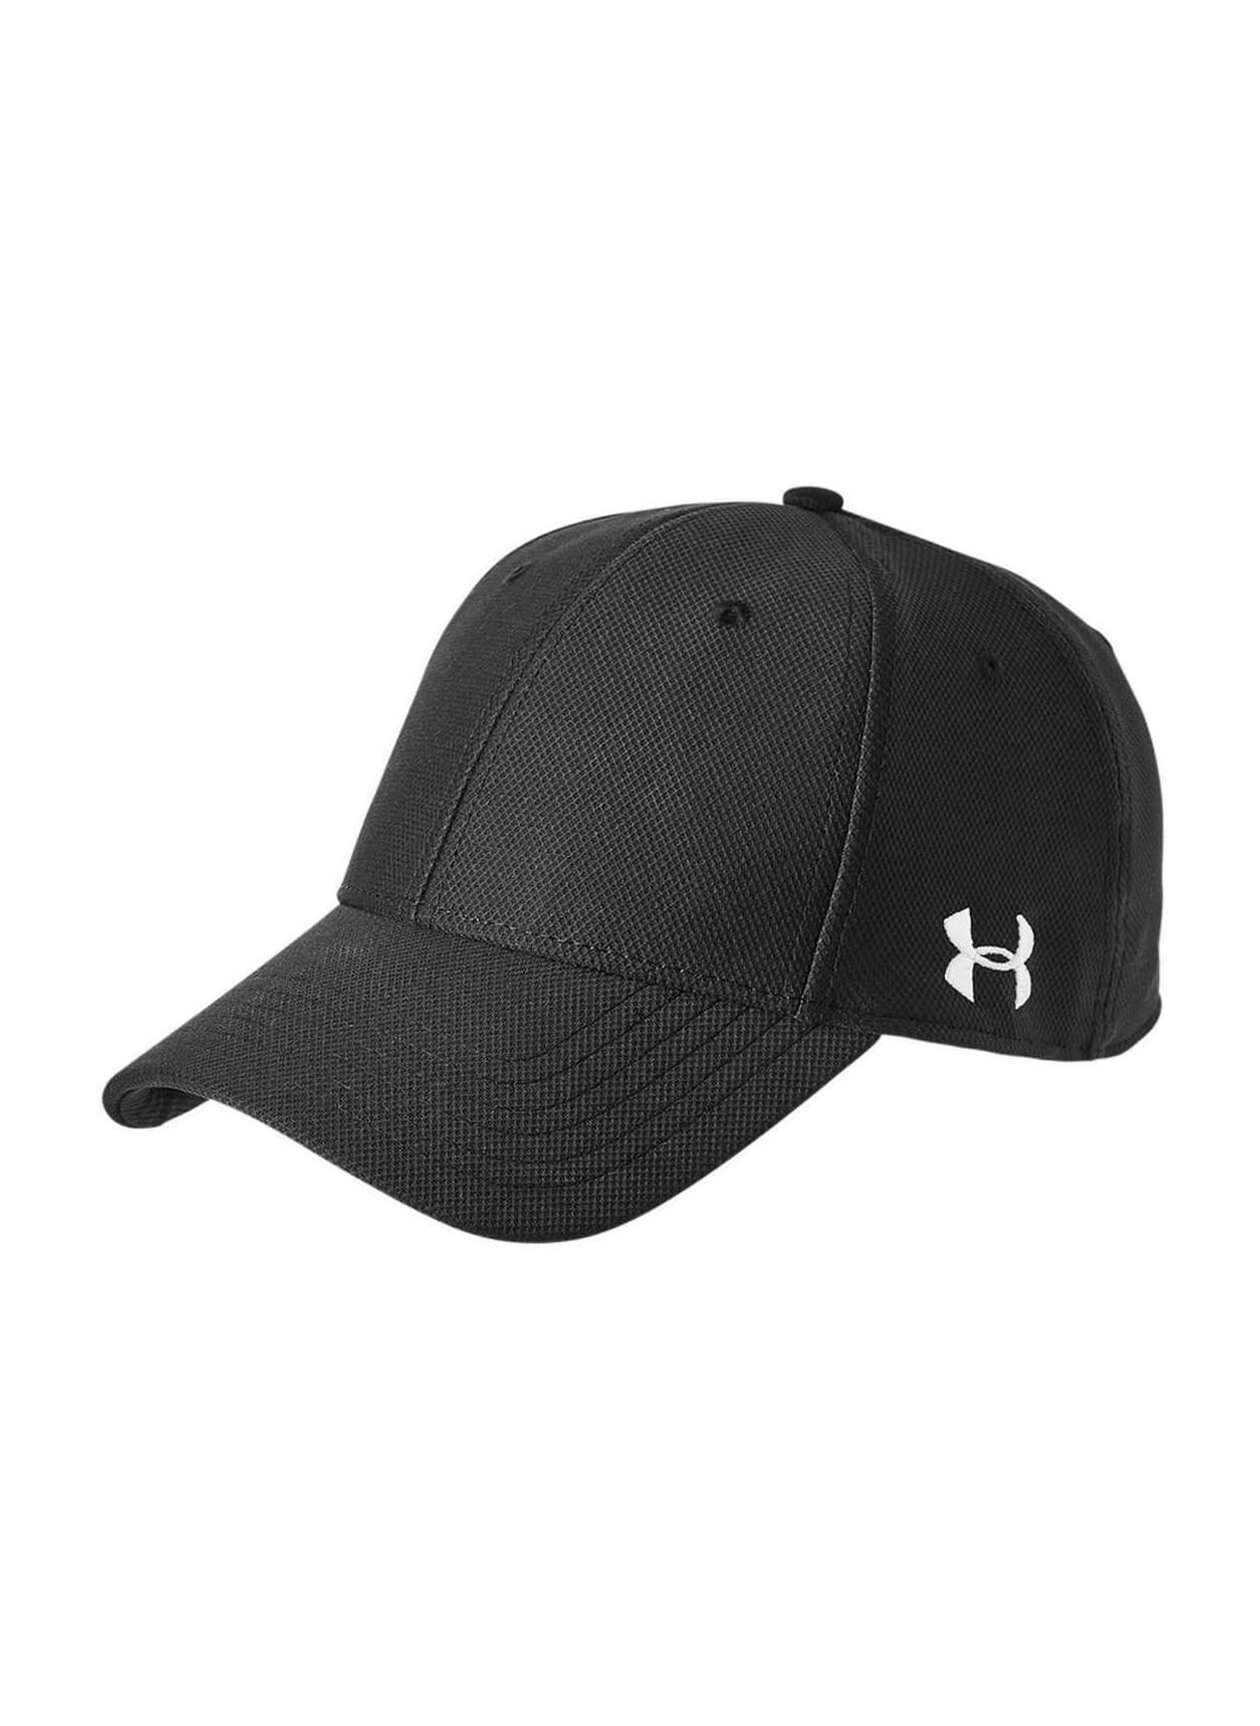 Under Armour Blitzing Curved Hat